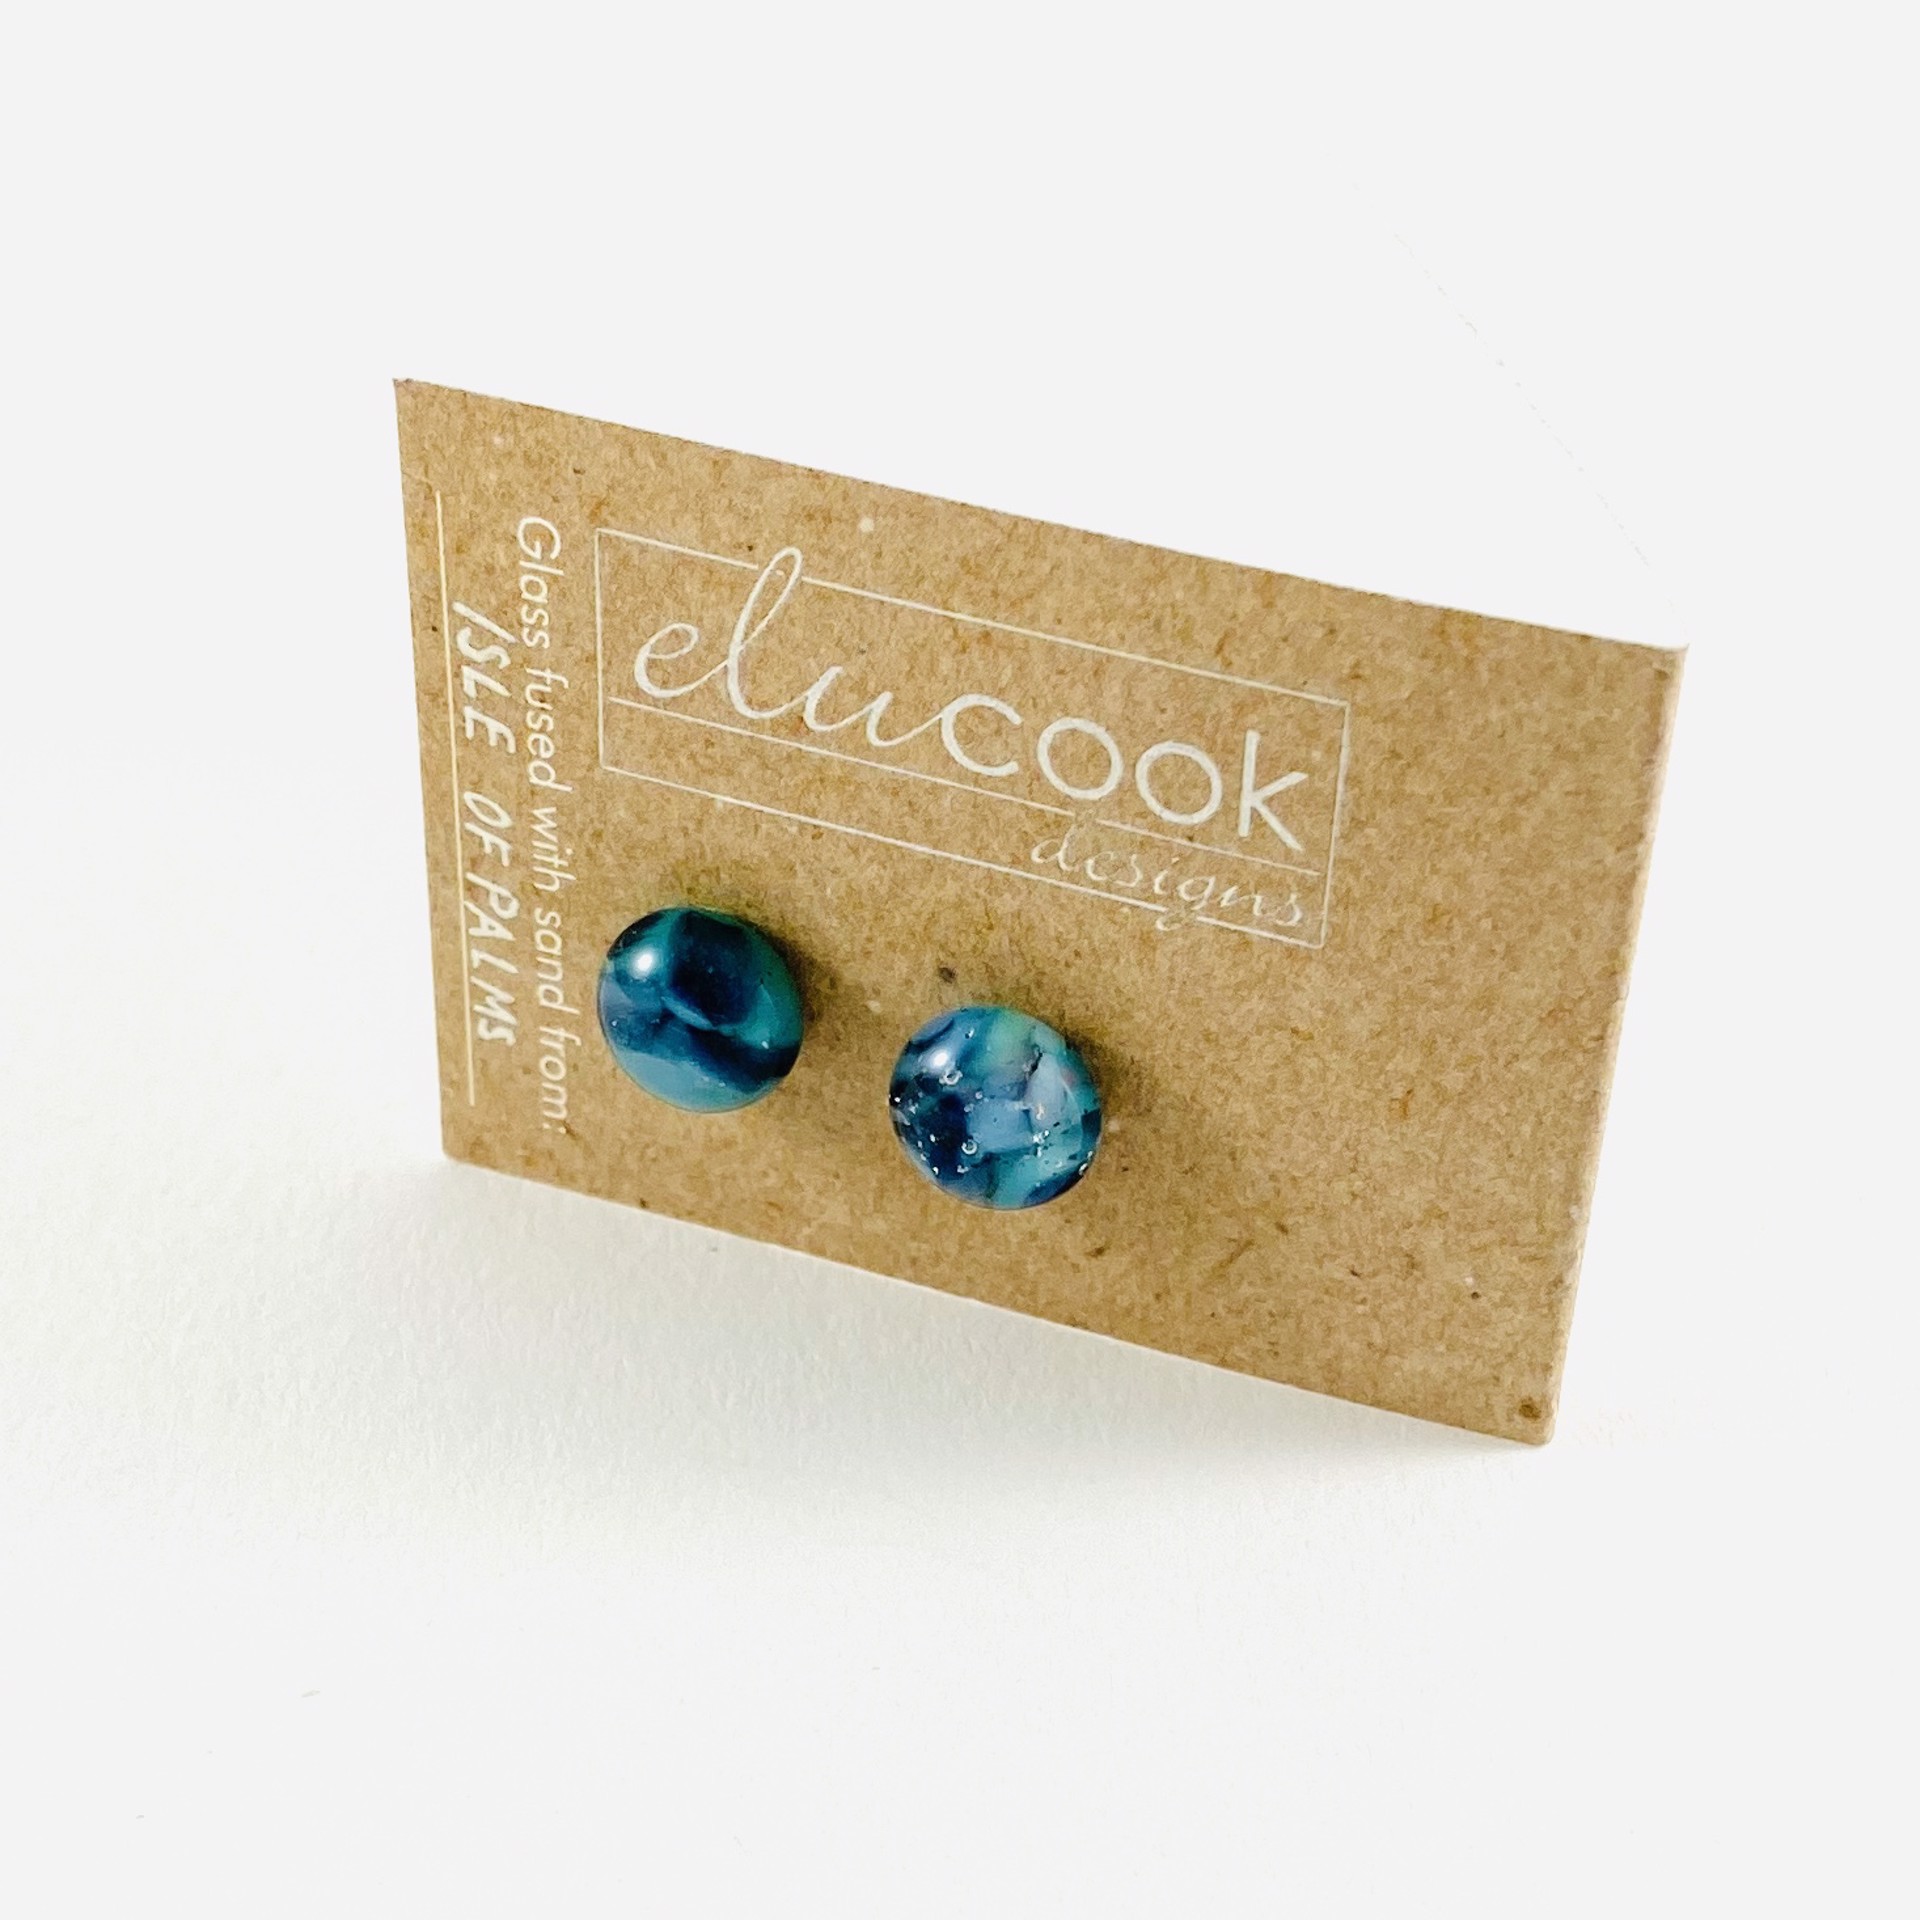 Button Earrings, 9a by Emily Cook